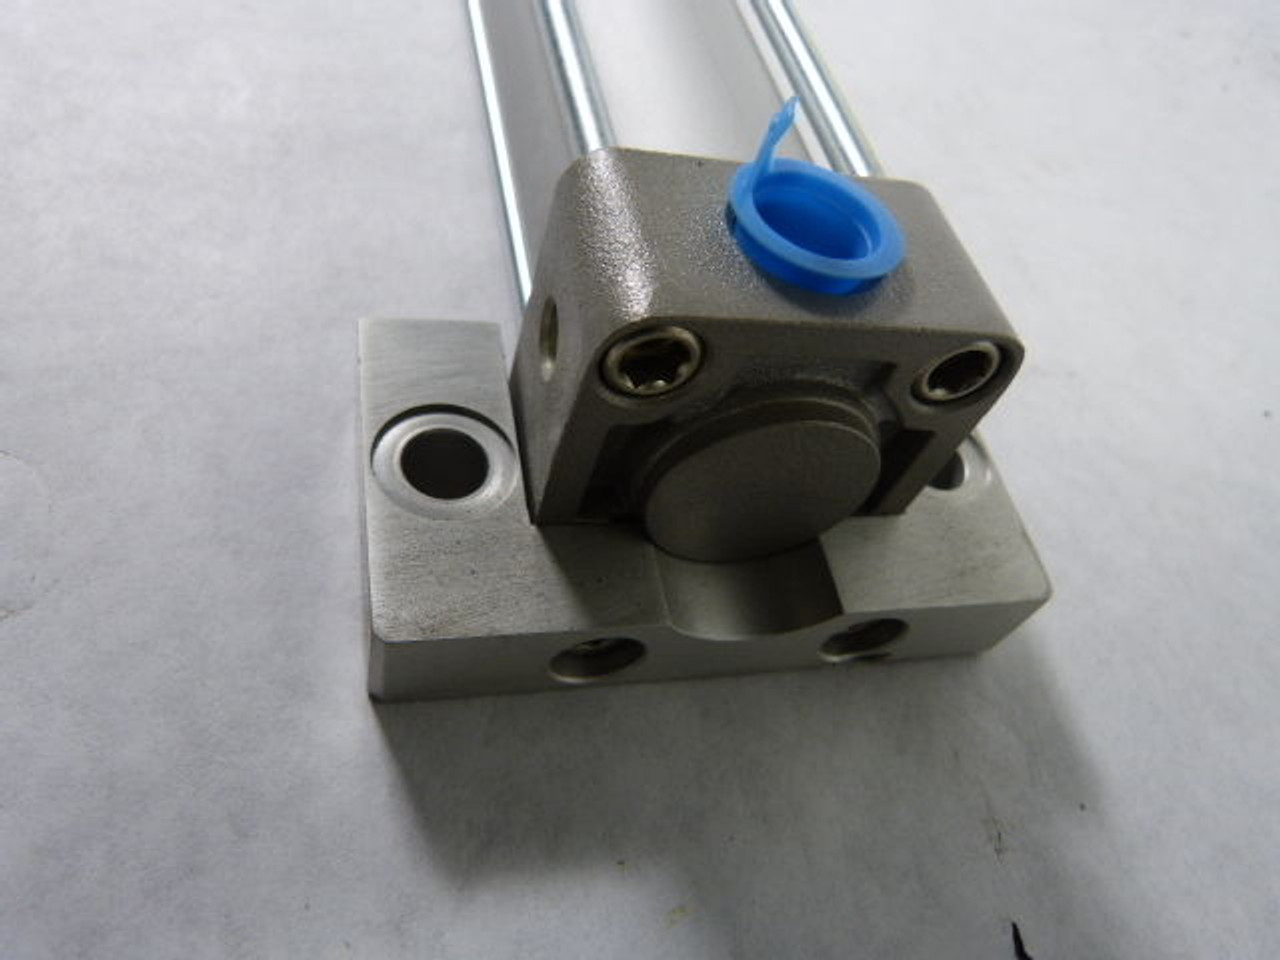 SMC NCA1S150-1800-XB9 Pneumatic Cylinder USED